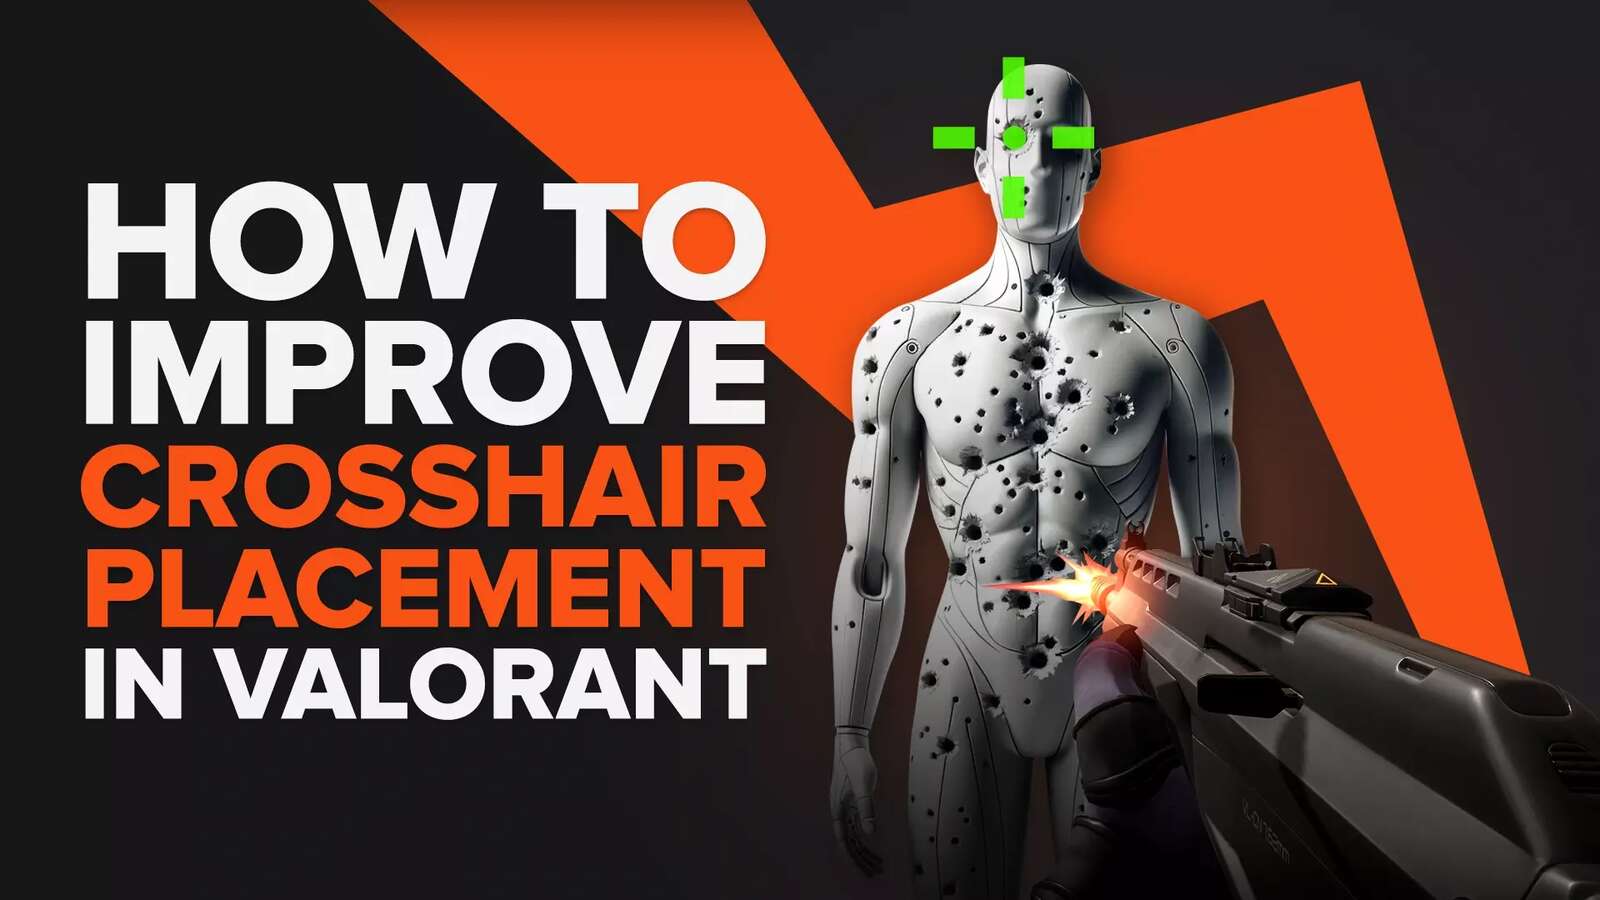 How To Improve Crosshair Placement In Valorant [5 Methods]